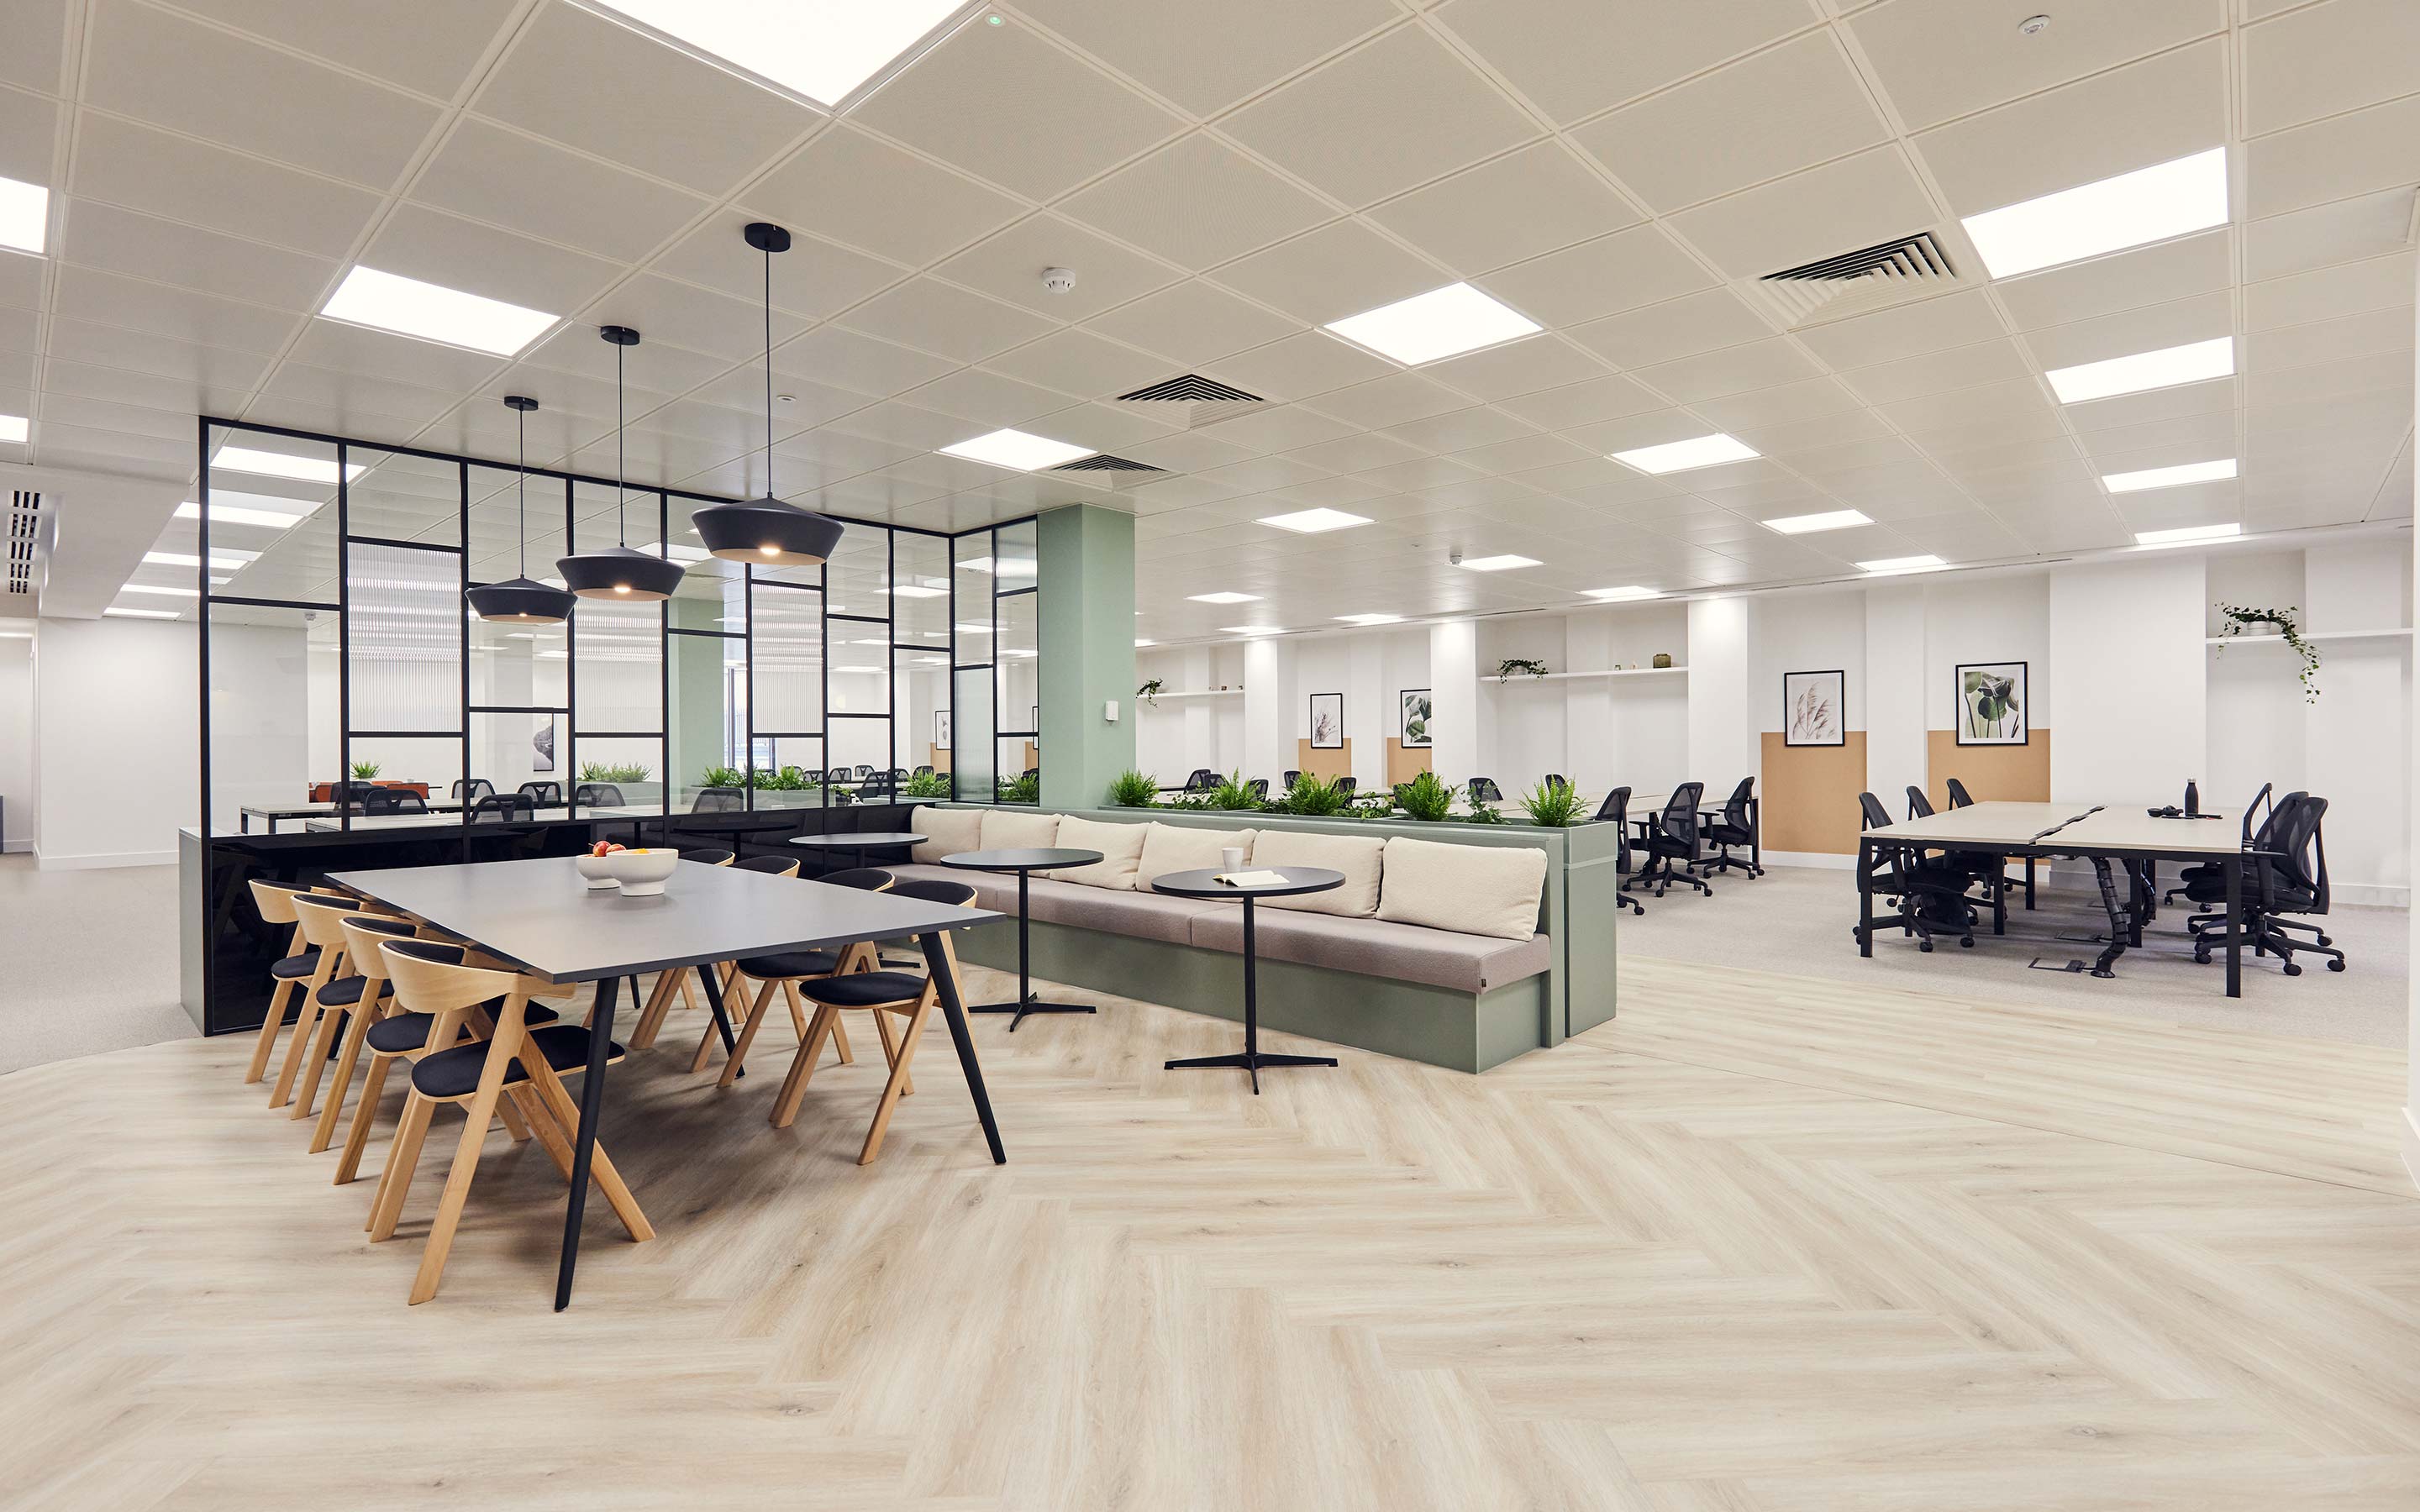 The image features an open plan office and teapoint with an array of seating options, including a kitchen table and chairs, traditional office desks, and banquette seating